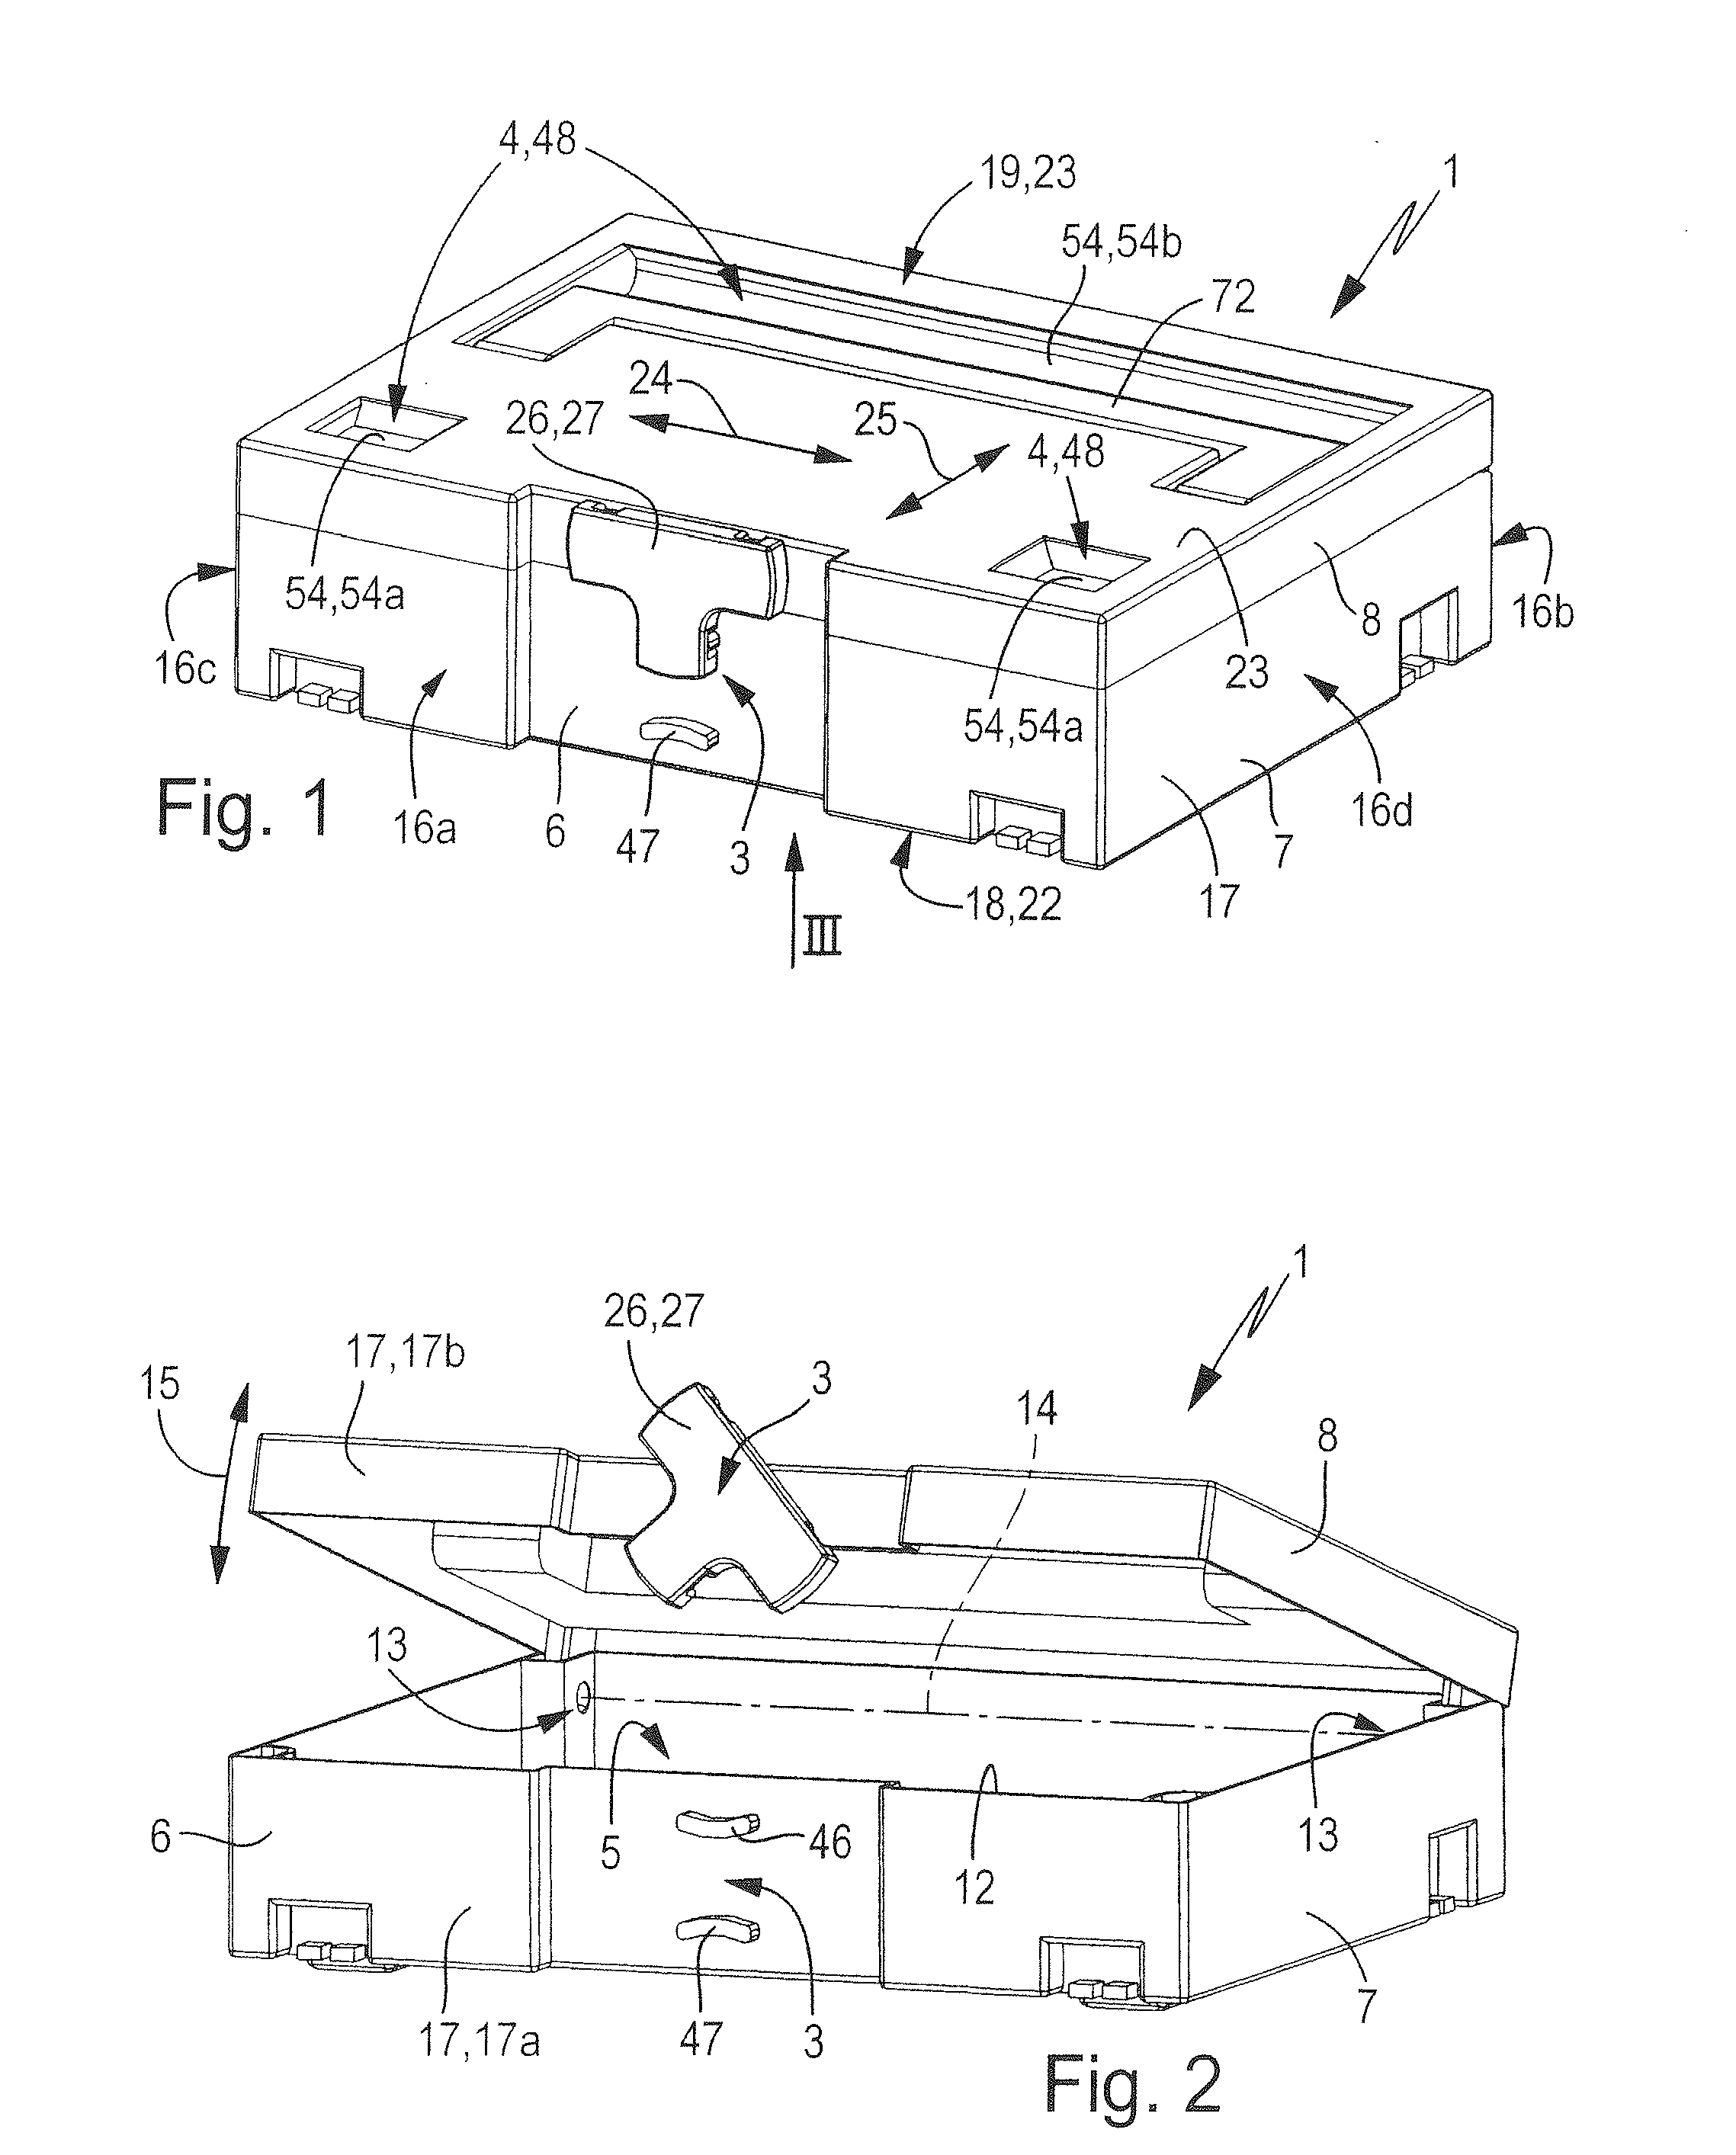 Stackable container assembly with reciprocal locking of the stacked containers